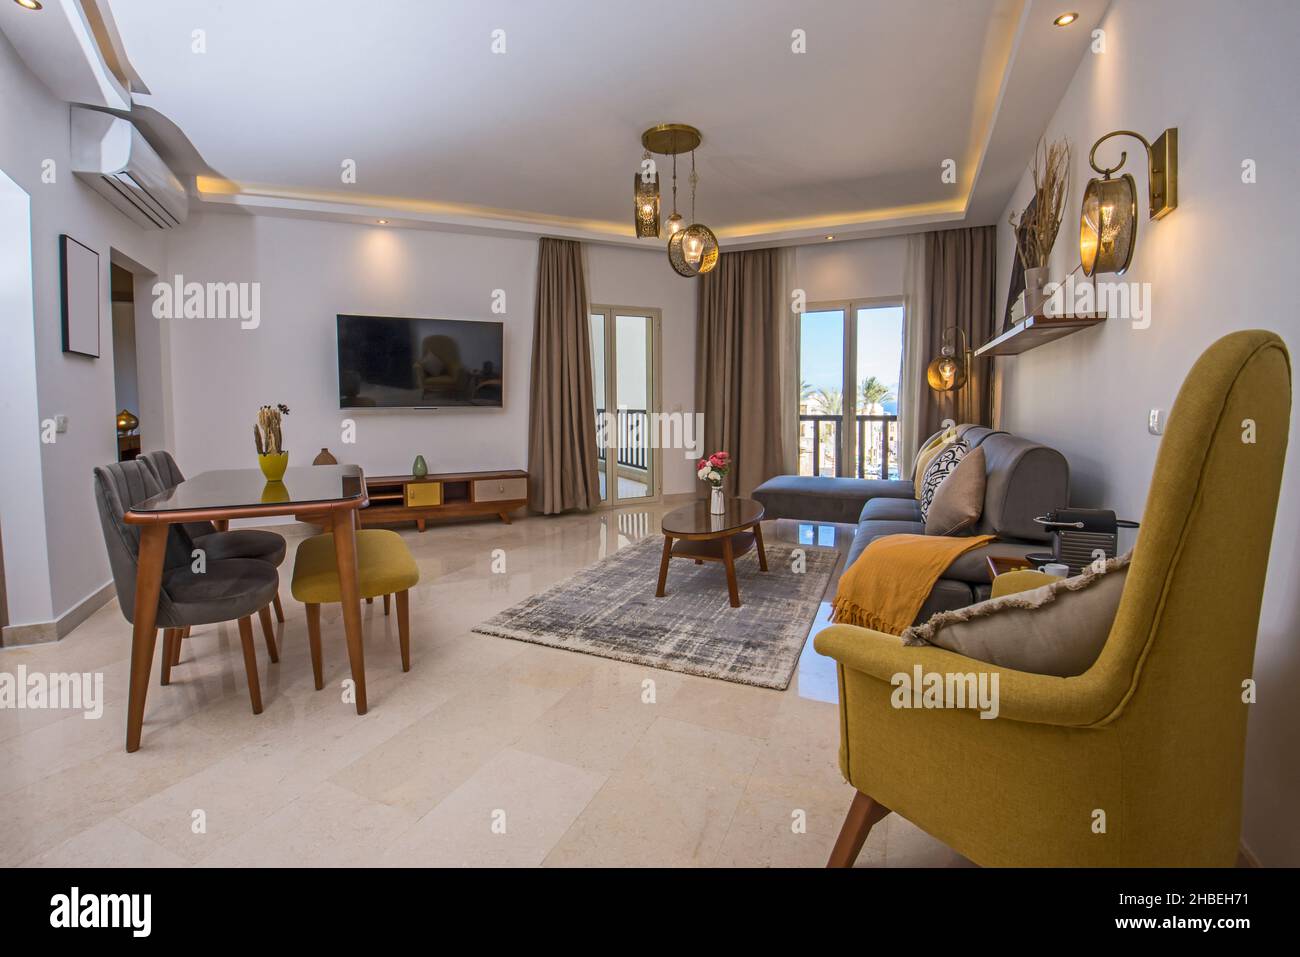 Open plan living room lounge area in luxury apartment show home showing interior design decor furnishing with balcony terrace Stock Photo